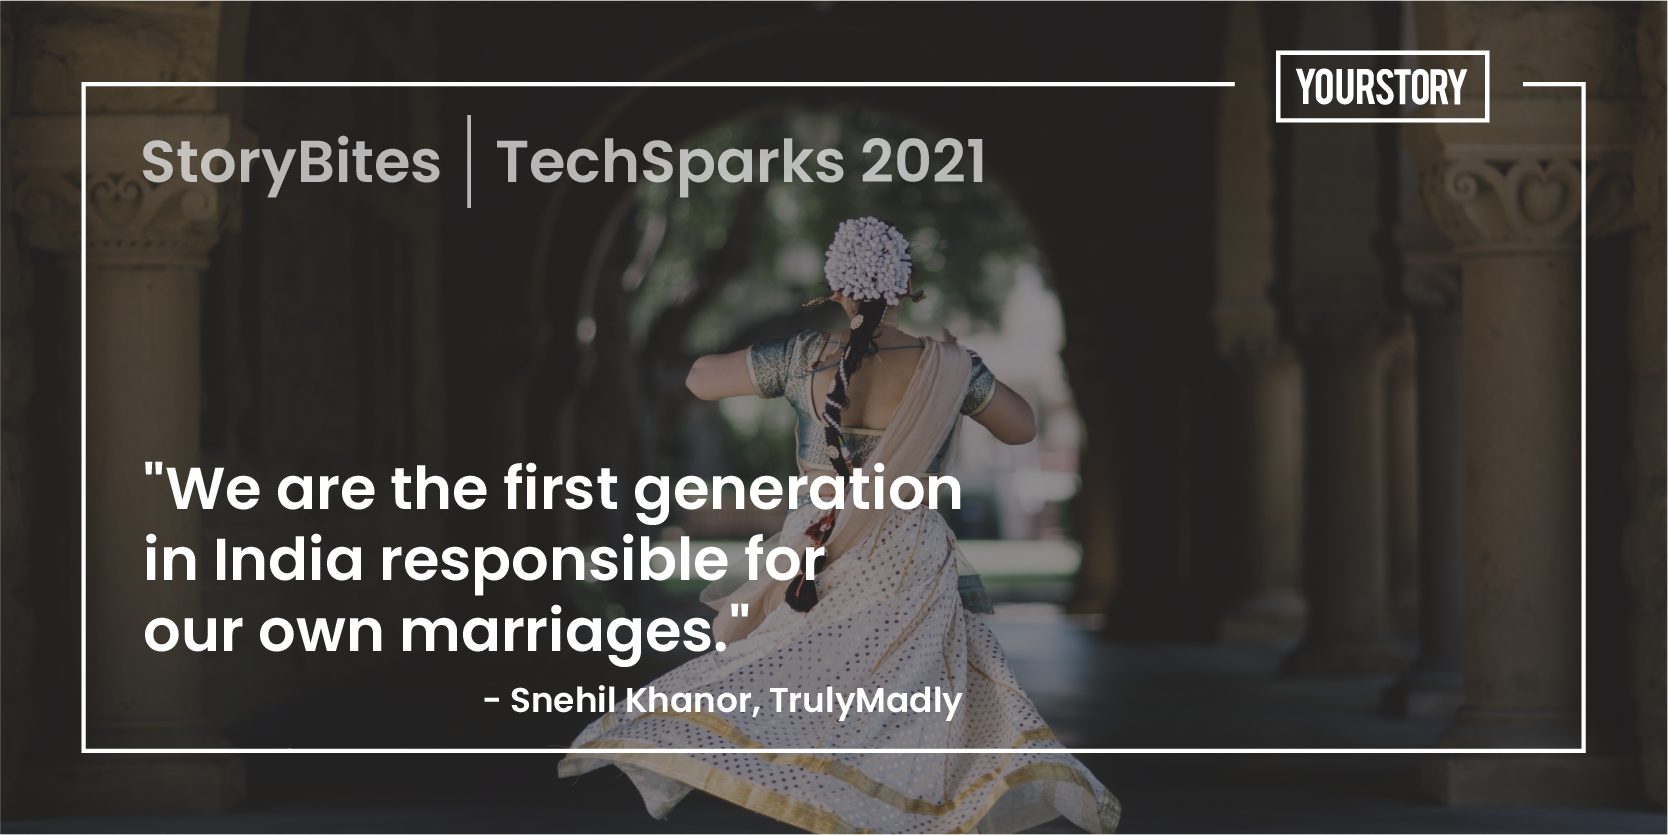 ‘We are the first generation in India responsible for our own marriages’ – 30 quotes on the India socio-economic opportunity, from TechSparks 2021